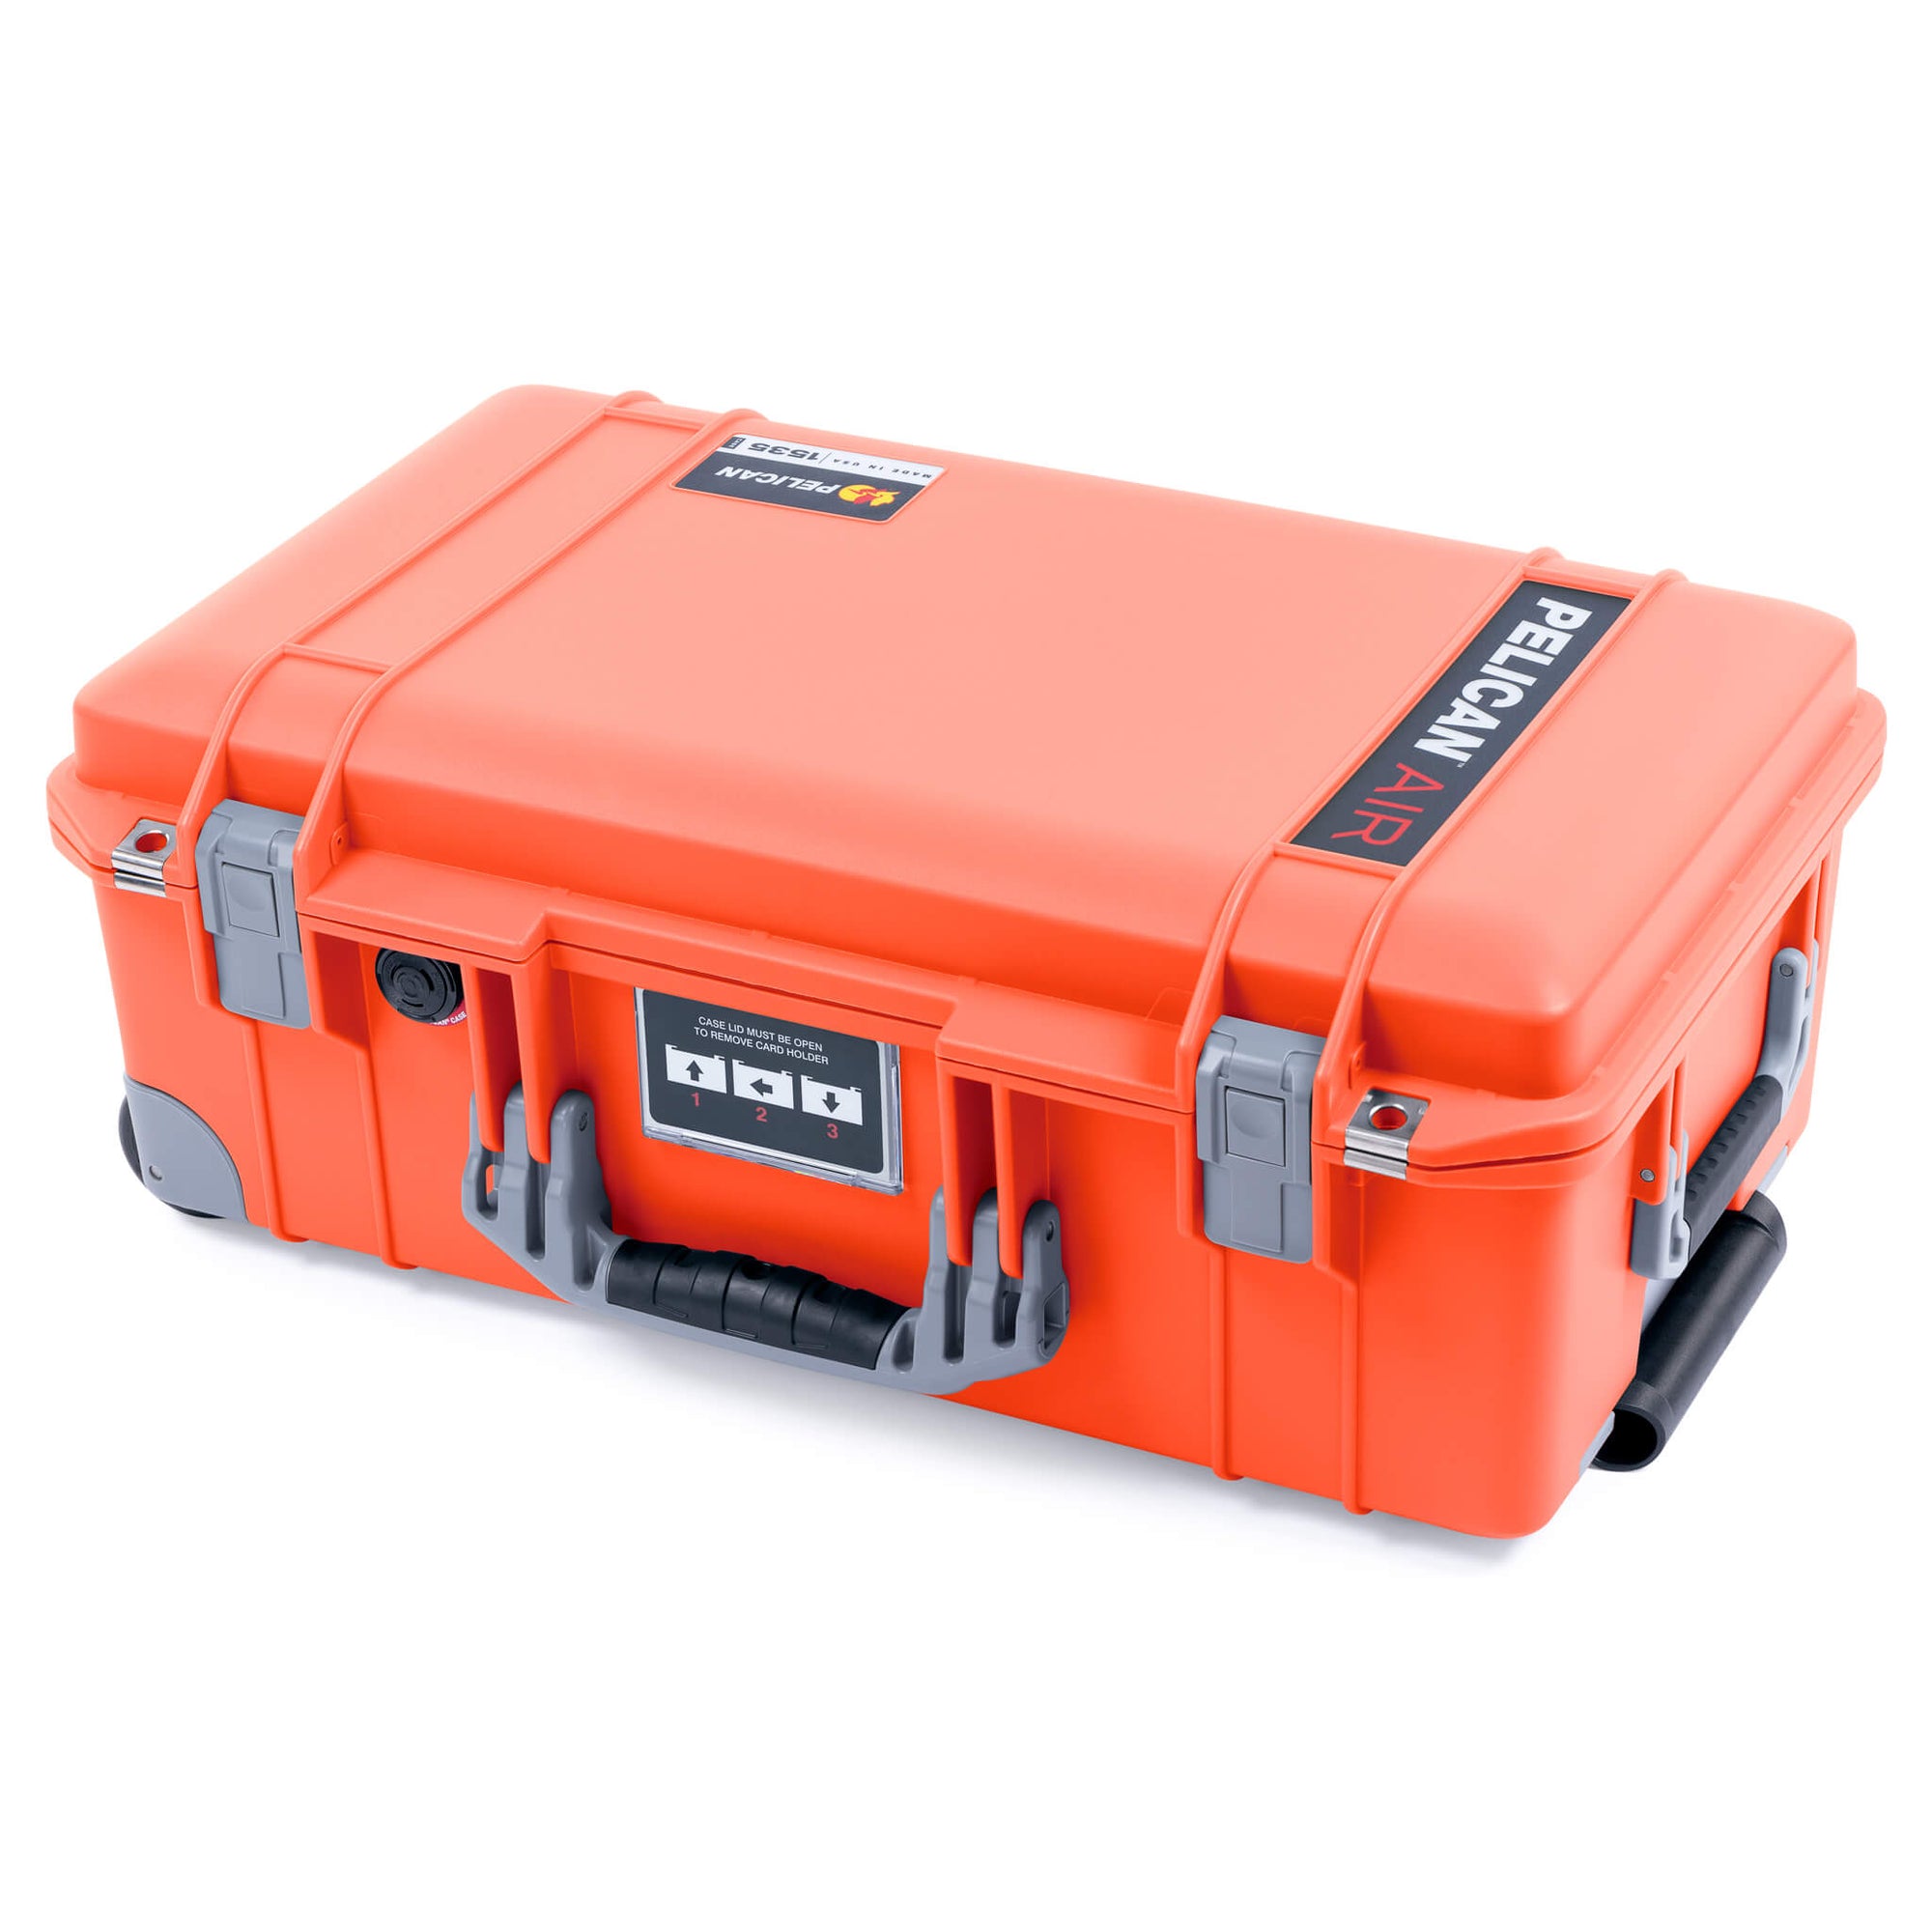 Pelican 1535 Air Case, Orange with Silver Handles, Push-Button Latches & Trolley ColorCase 